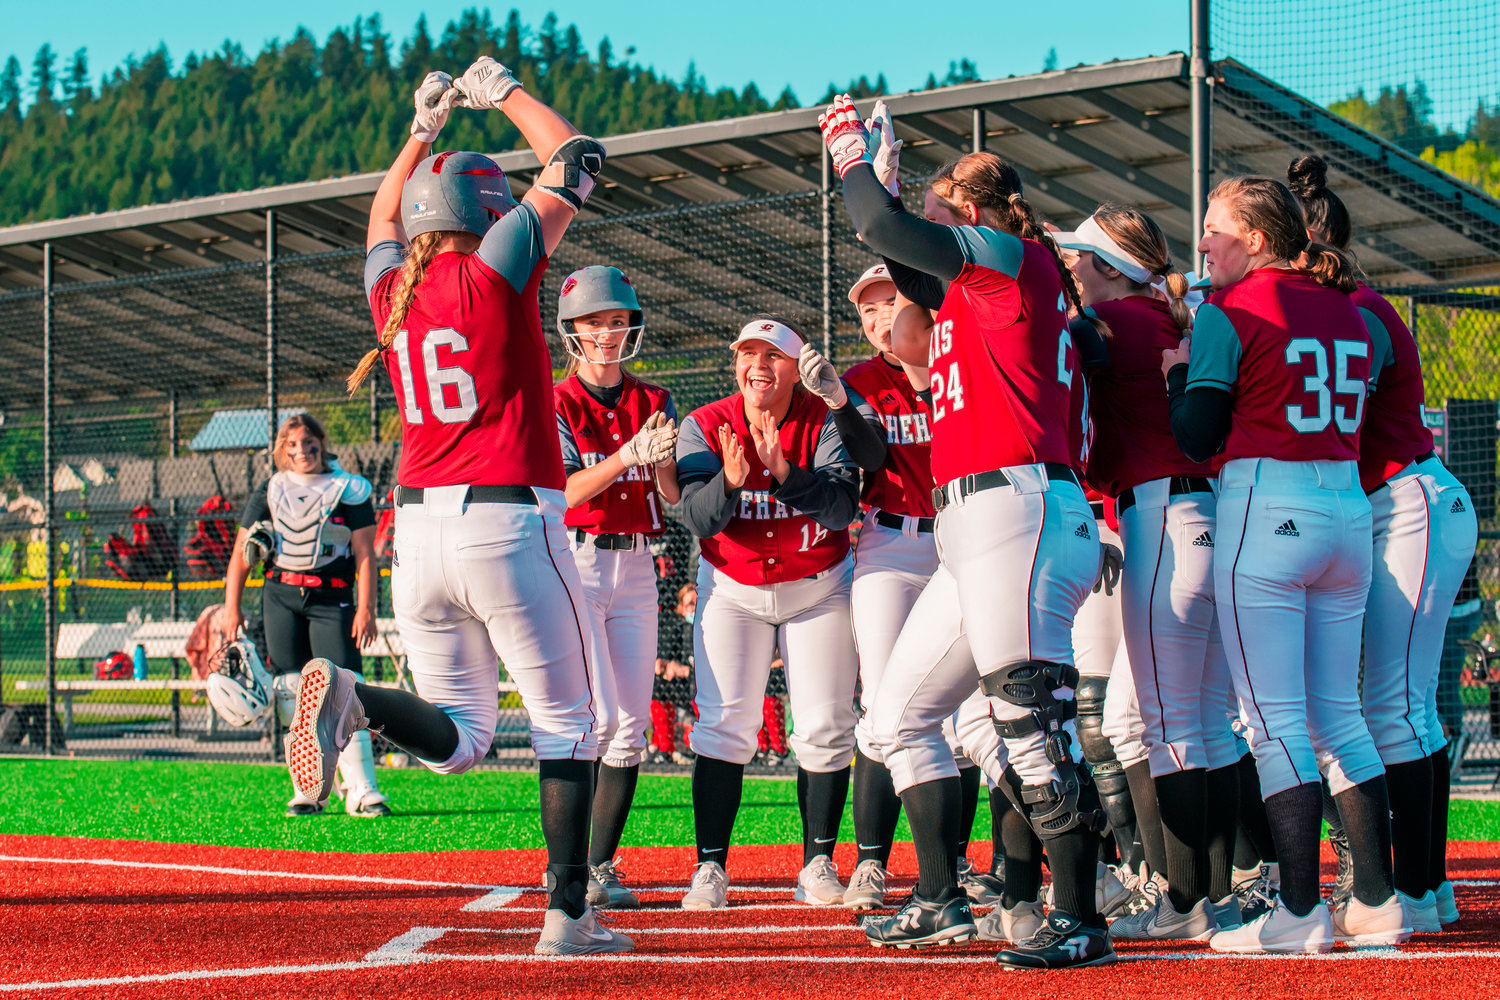 Kamy Dacus (16) is met at home plate by fellow players after knocking a ball out of the field for a homerun during a game against Shelton, Tuesday afternoon in Chehalis.